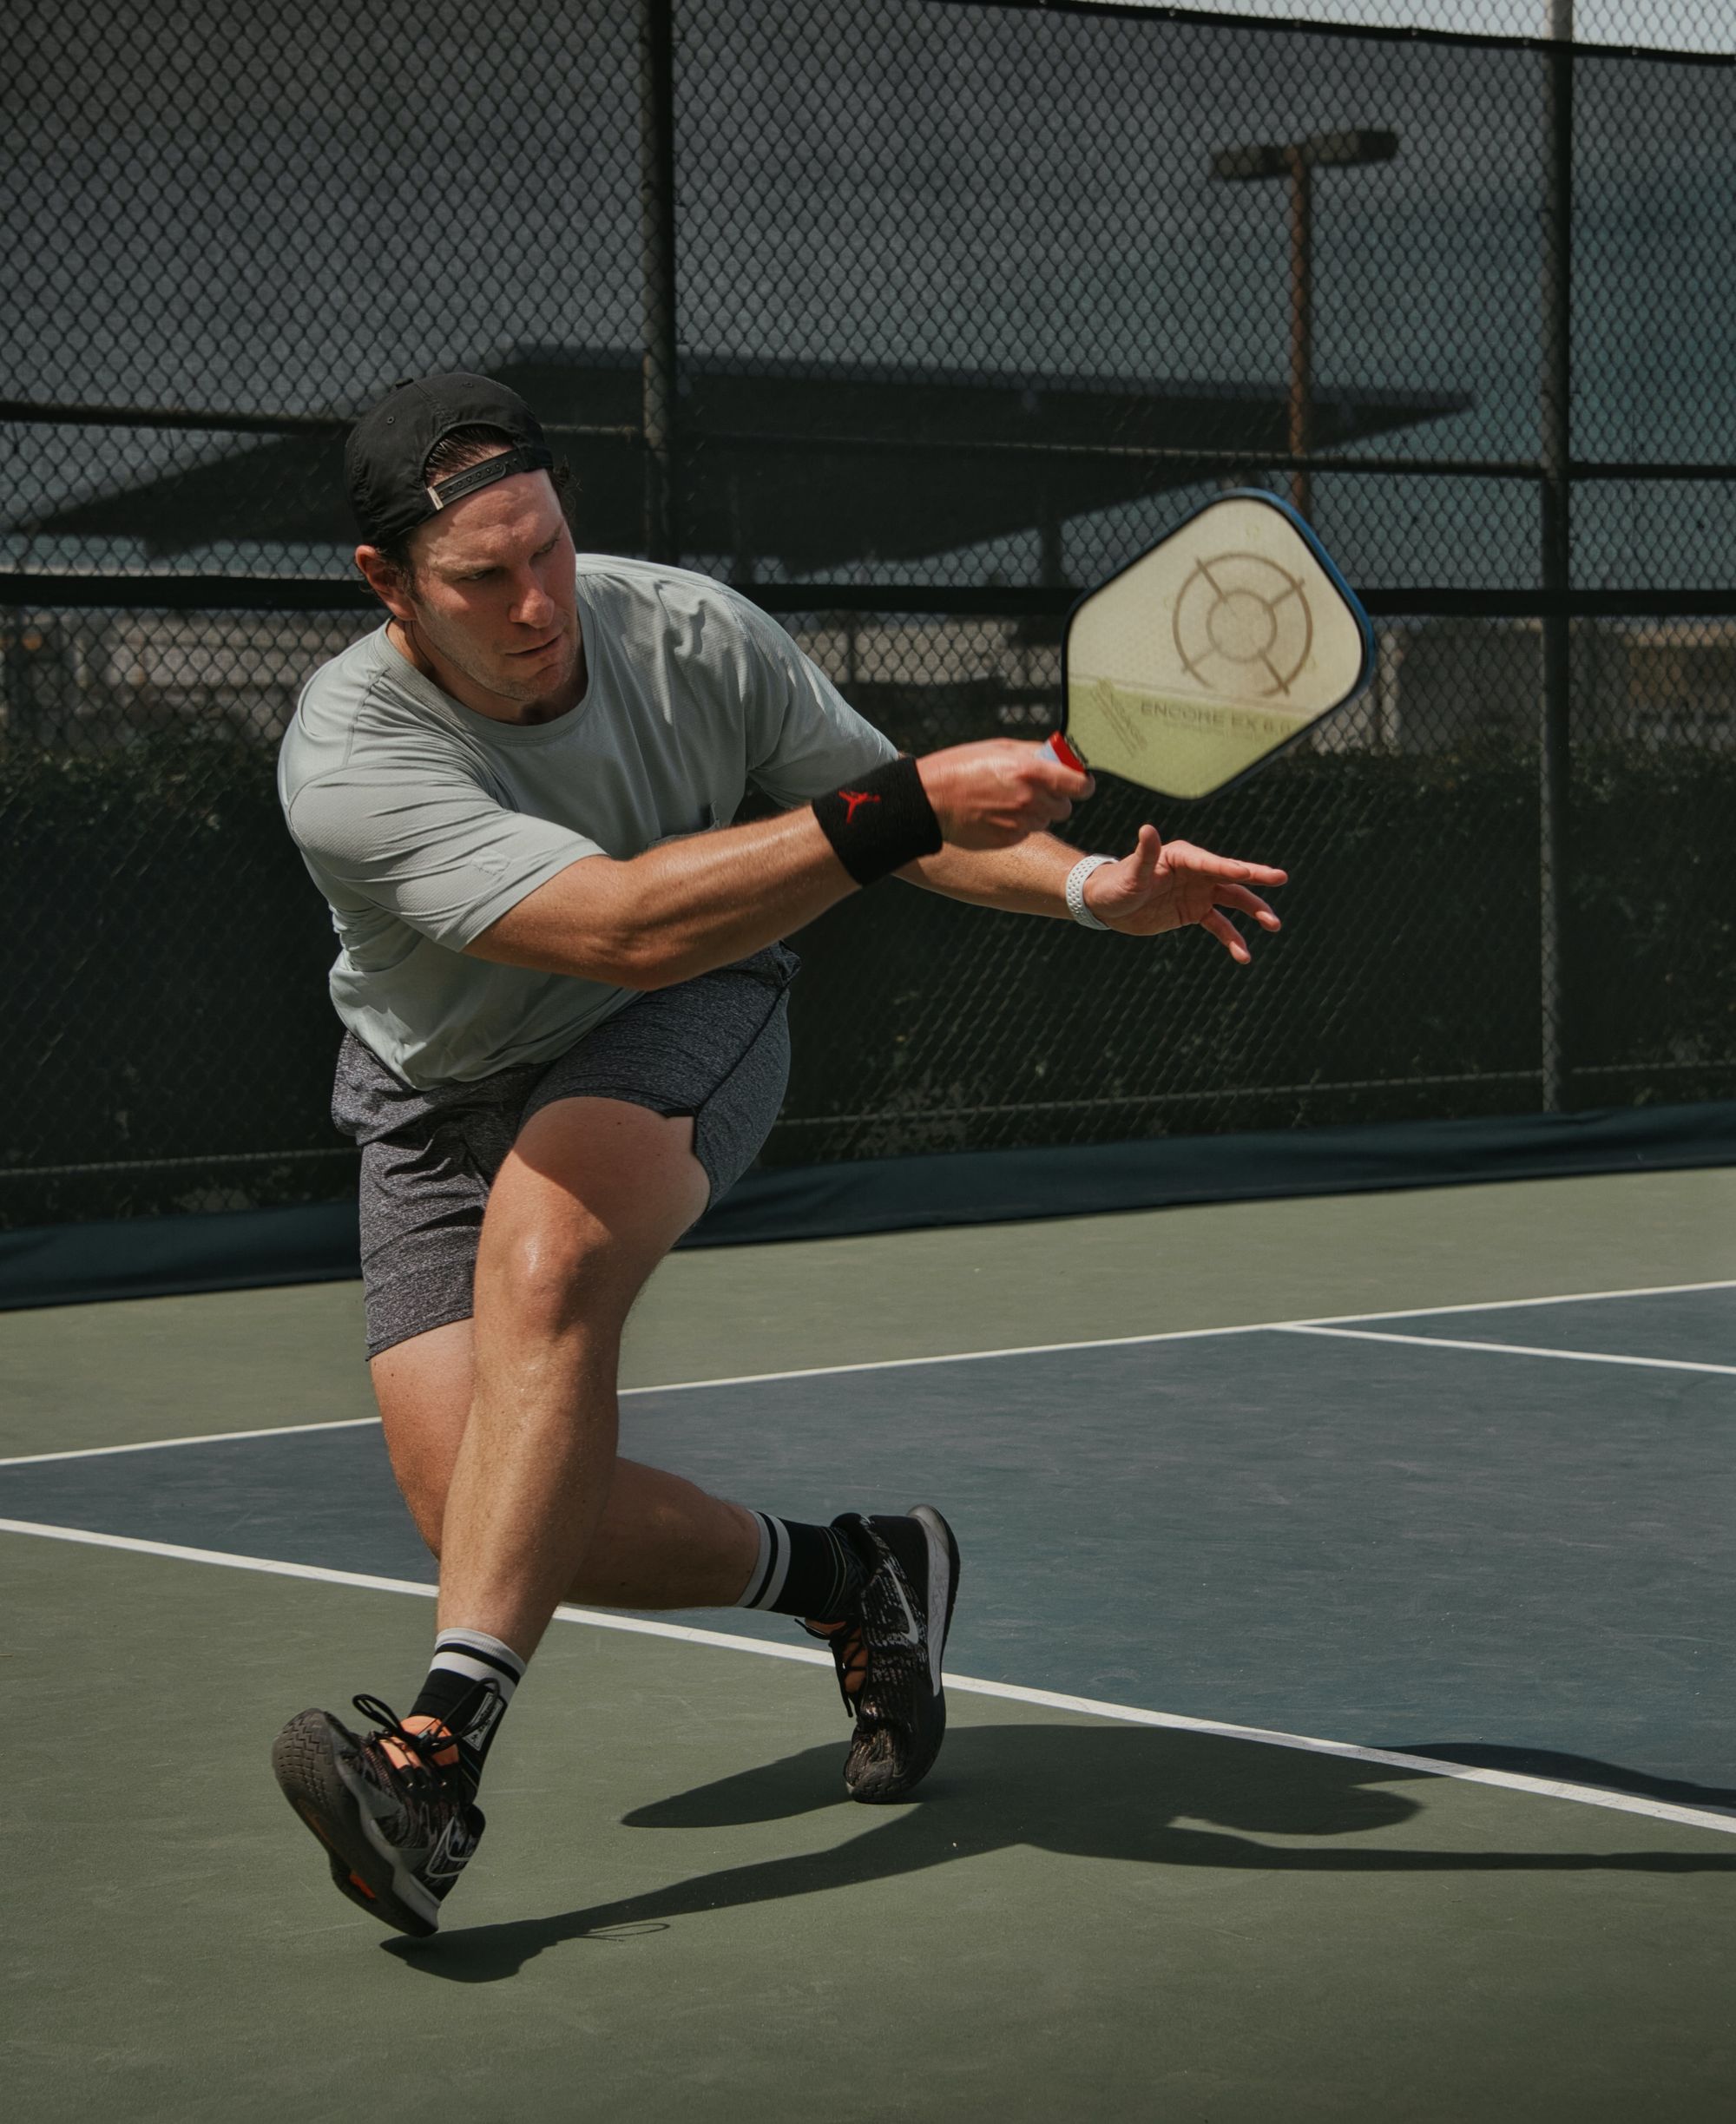 Two people playing pickleball on a professional pickleball association court